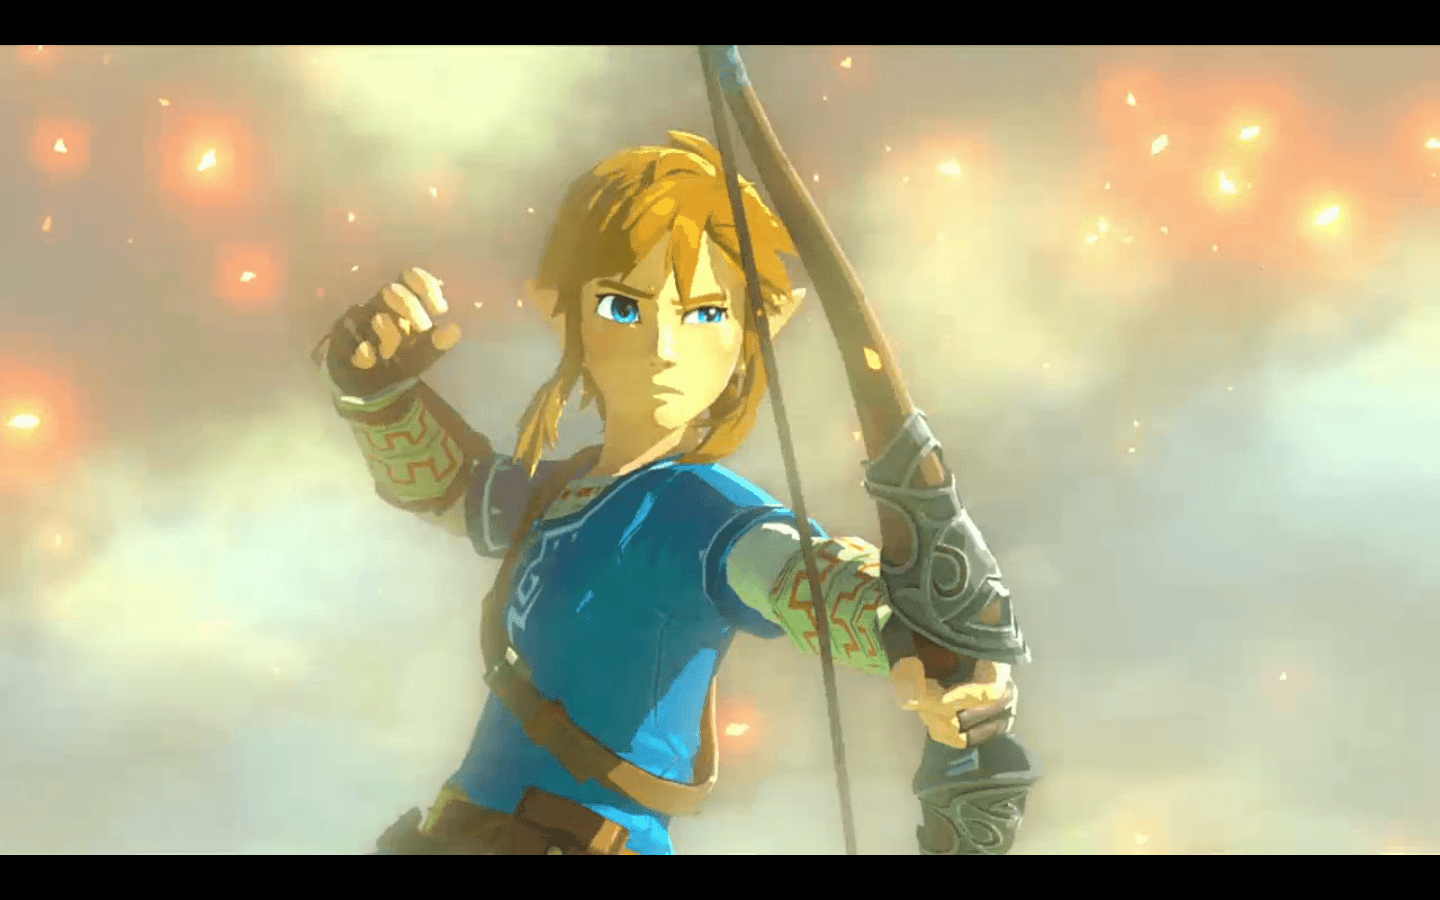 E3 2014: New Open World The Legend Of Zelda Coming In 2015